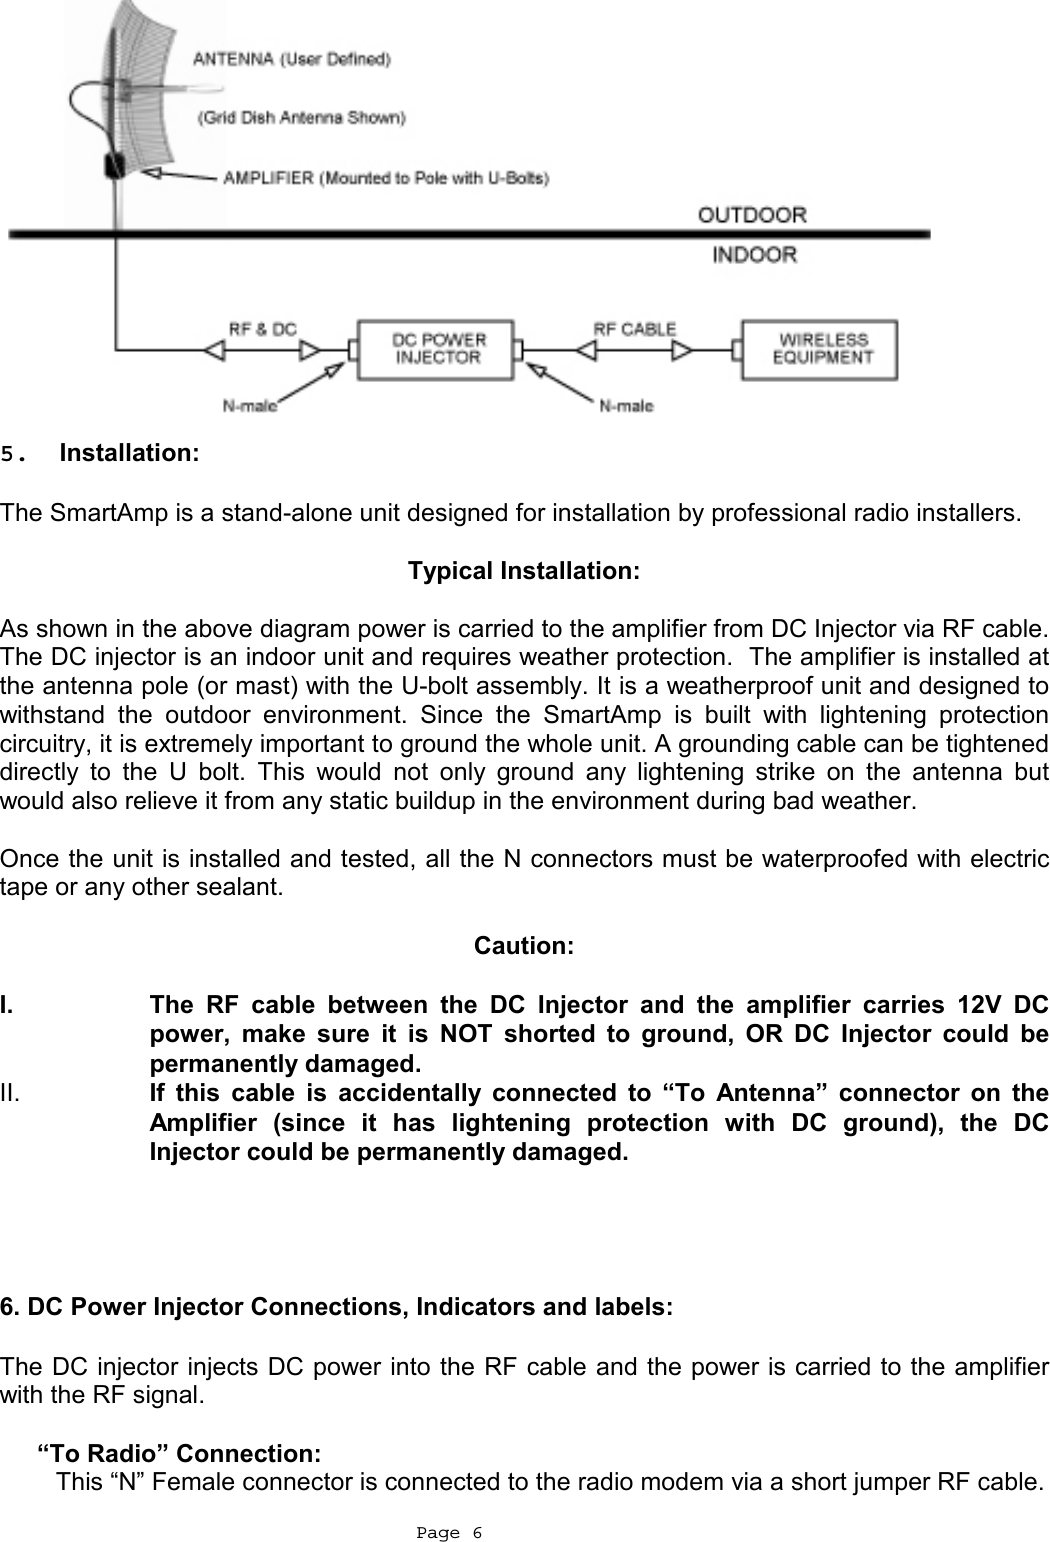  Page 6    5.  Installation:   The SmartAmp is a stand-alone unit designed for installation by professional radio installers.  Typical Installation:  As shown in the above diagram power is carried to the amplifier from DC Injector via RF cable.  The DC injector is an indoor unit and requires weather protection.  The amplifier is installed at the antenna pole (or mast) with the U-bolt assembly. It is a weatherproof unit and designed to withstand the outdoor environment. Since the SmartAmp is built with lightening protection circuitry, it is extremely important to ground the whole unit. A grounding cable can be tightened directly to the U bolt. This would not only ground any lightening strike on the antenna but would also relieve it from any static buildup in the environment during bad weather.   Once the unit is installed and tested, all the N connectors must be waterproofed with electric tape or any other sealant.   Caution:  I.  The RF cable between the DC Injector and the amplifier carries 12V DC power, make sure it is NOT shorted to ground, OR DC Injector could be permanently damaged. II.  If this cable is accidentally connected to “To Antenna” connector on the Amplifier (since it has lightening protection with DC ground), the DC Injector could be permanently damaged.     6. DC Power Injector Connections, Indicators and labels:   The DC injector injects DC power into the RF cable and the power is carried to the amplifier with the RF signal.   “To Radio” Connection: This “N” Female connector is connected to the radio modem via a short jumper RF cable. 